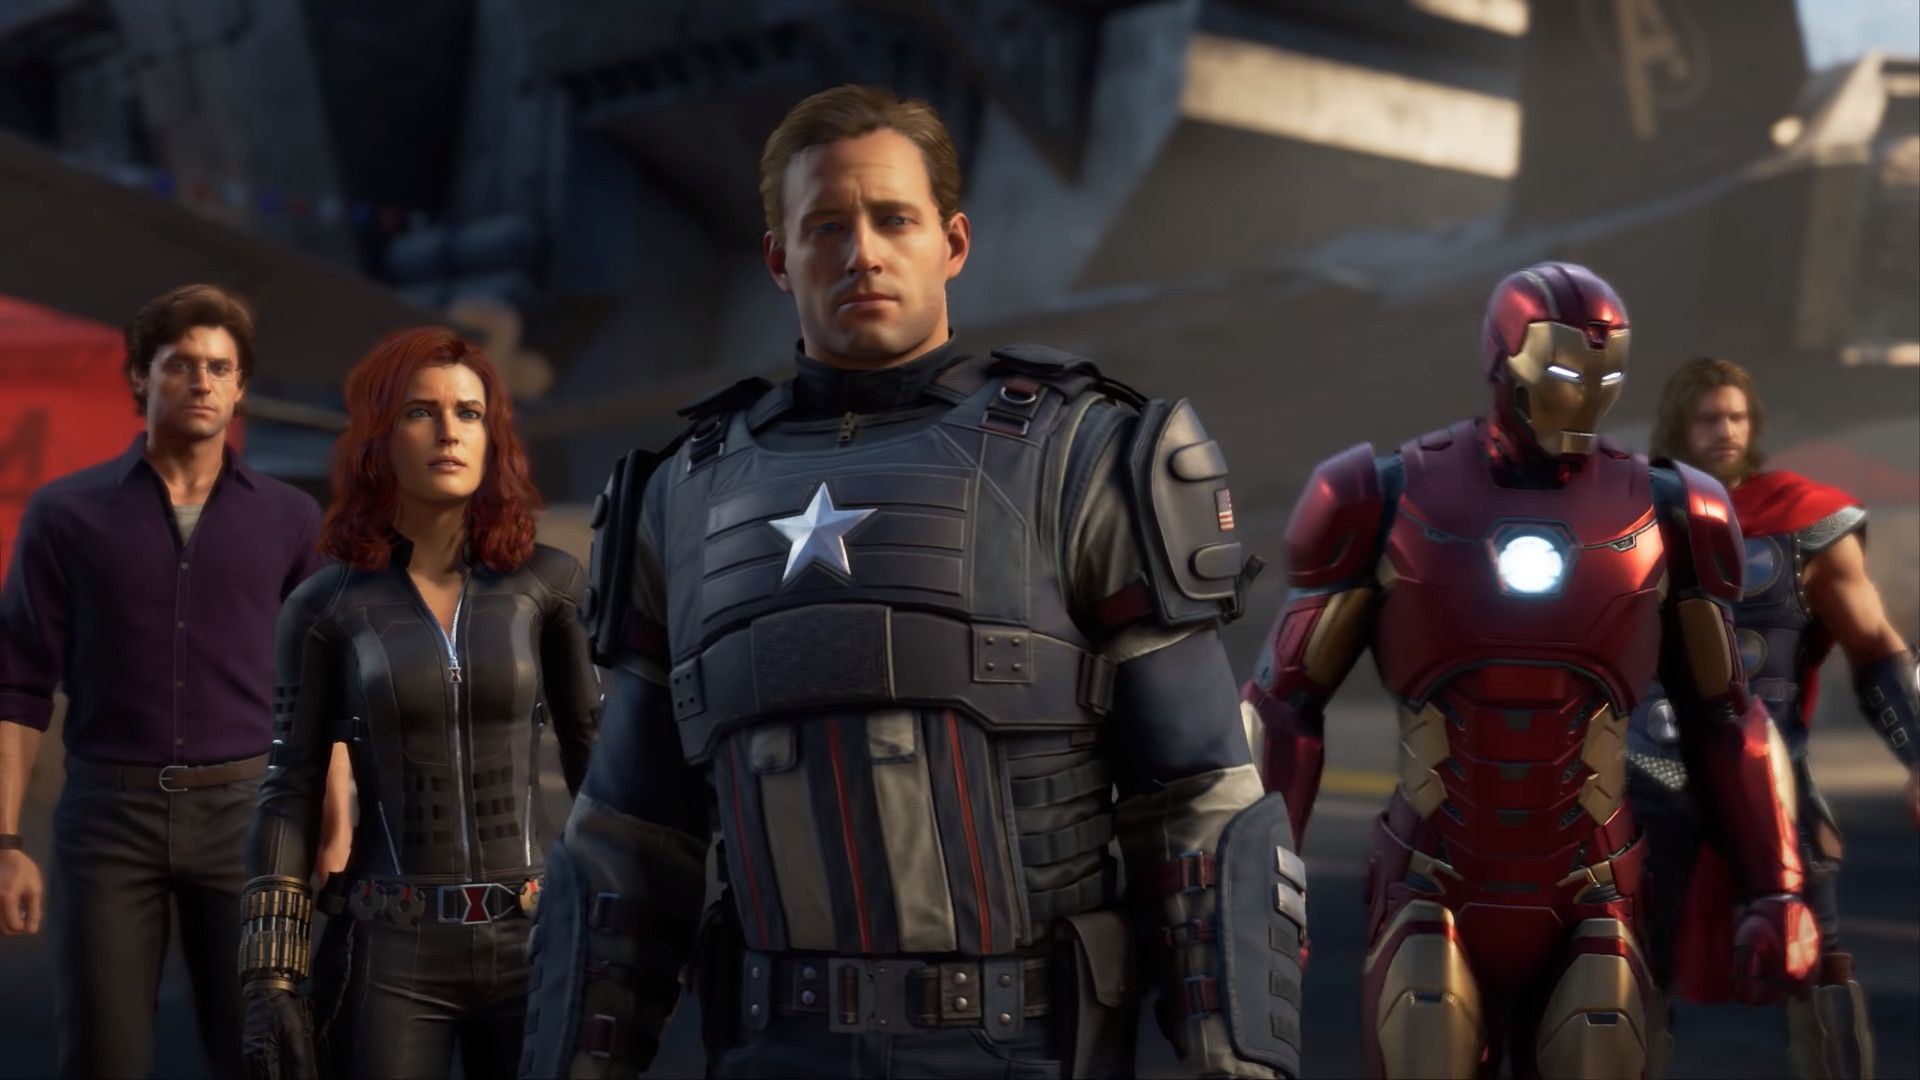 Marvel's Avengers game launches in May, will follow an original story